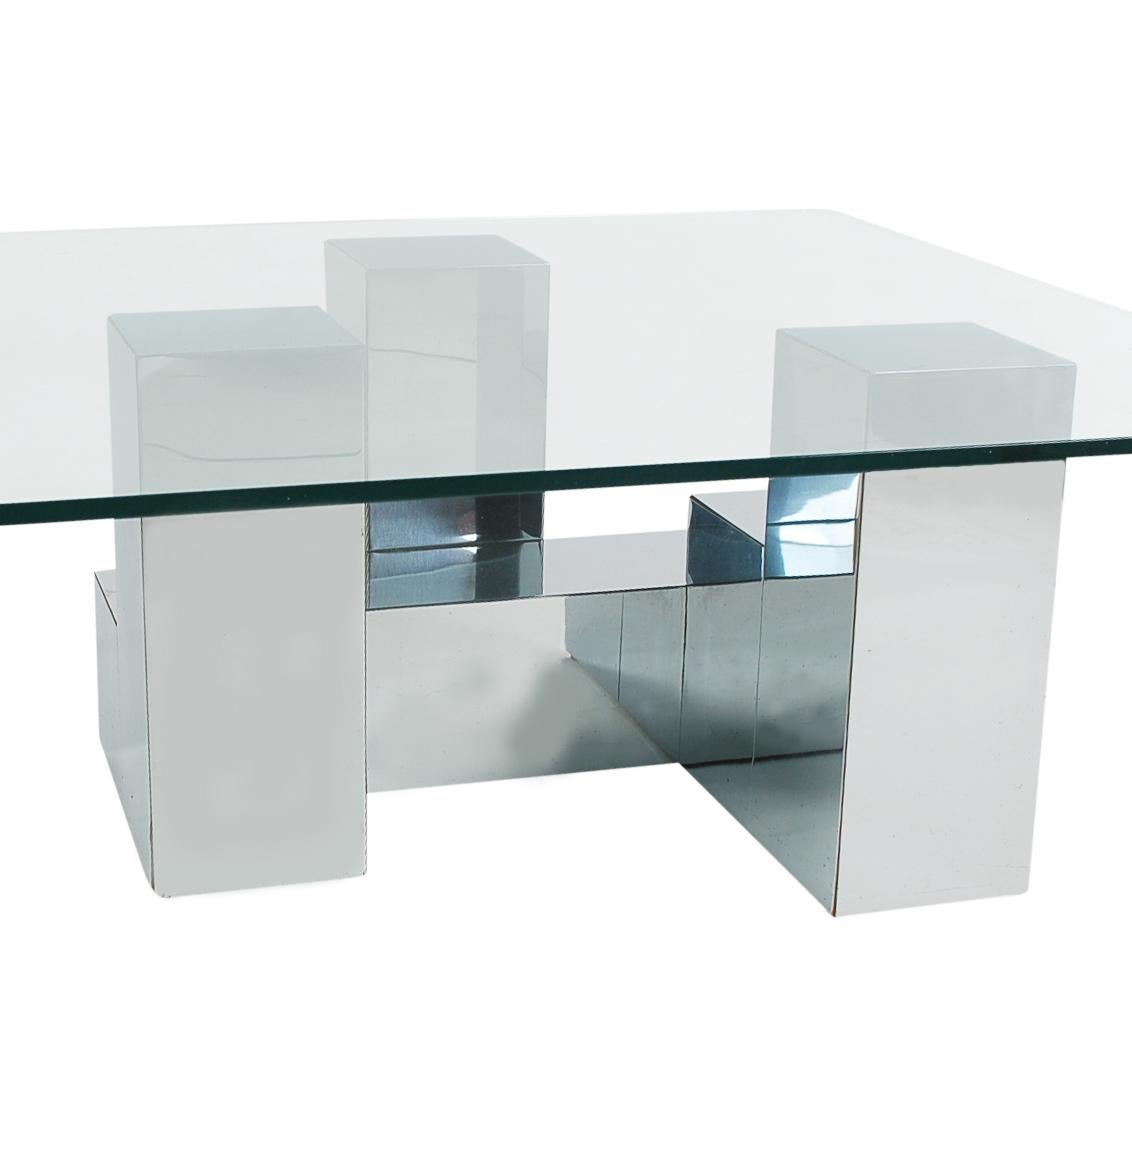 A stunning Cityscape design coffee table in the manner of Paul Evans. It features a chrome-plated wood constructed base, topped with thick clear glass top.